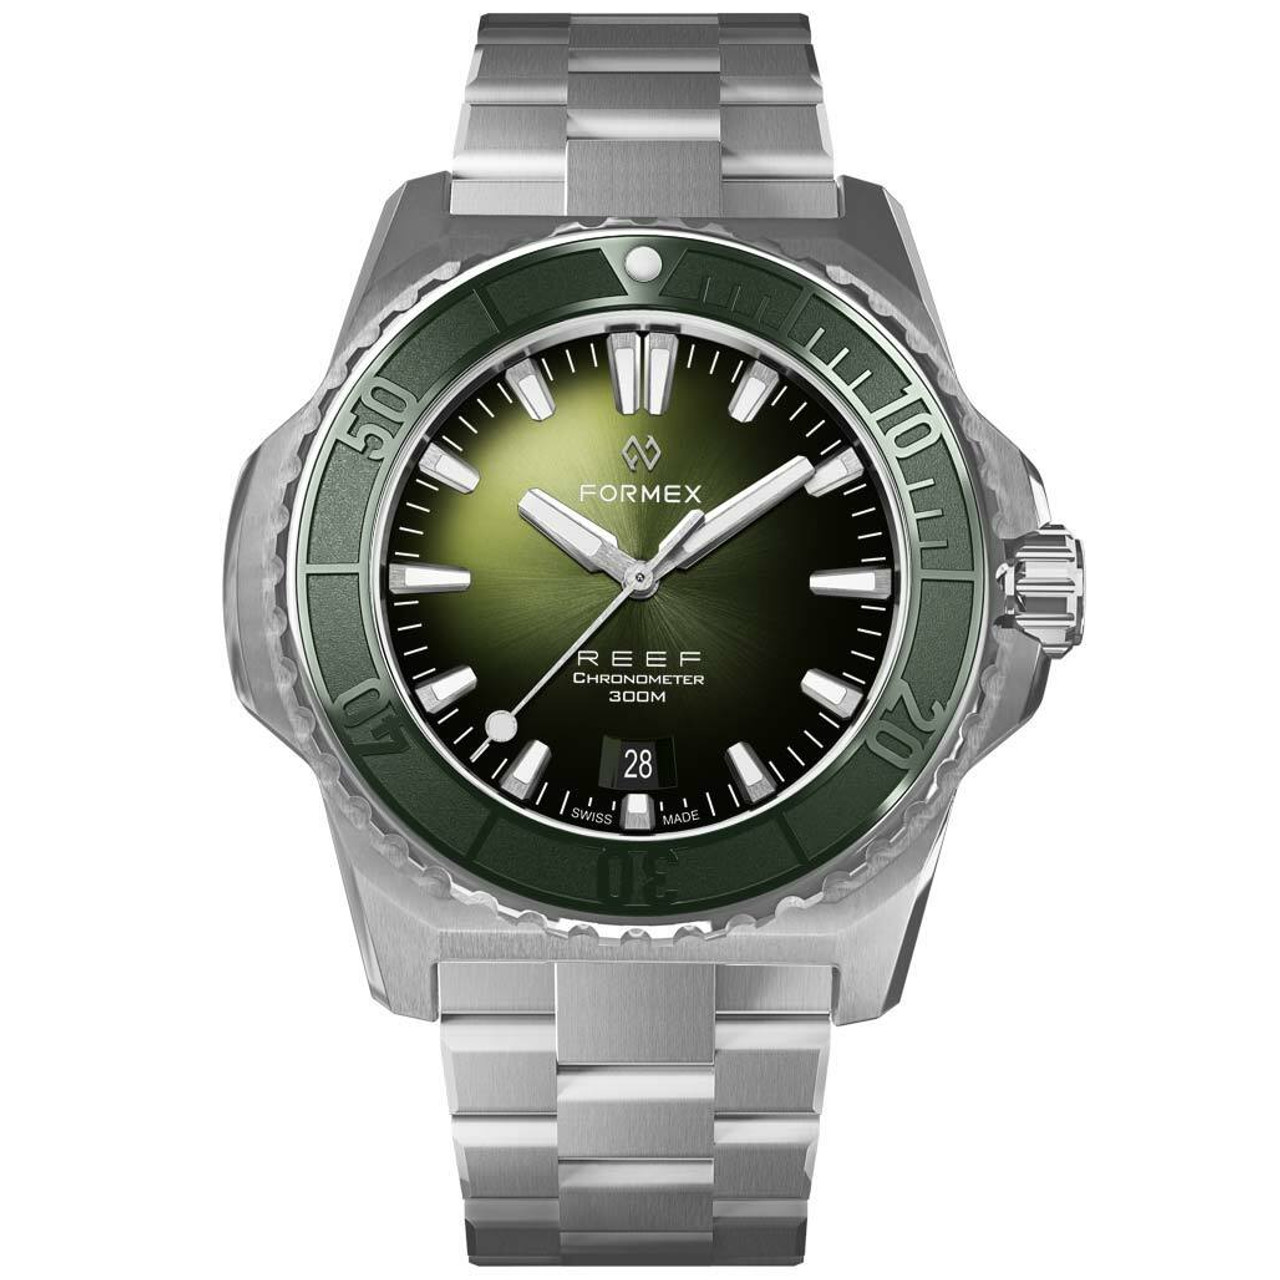 Formex REEF Swiss Automatic Chronometer Dive Watch with Sunburst Green Dial  #2200-1-6300-100